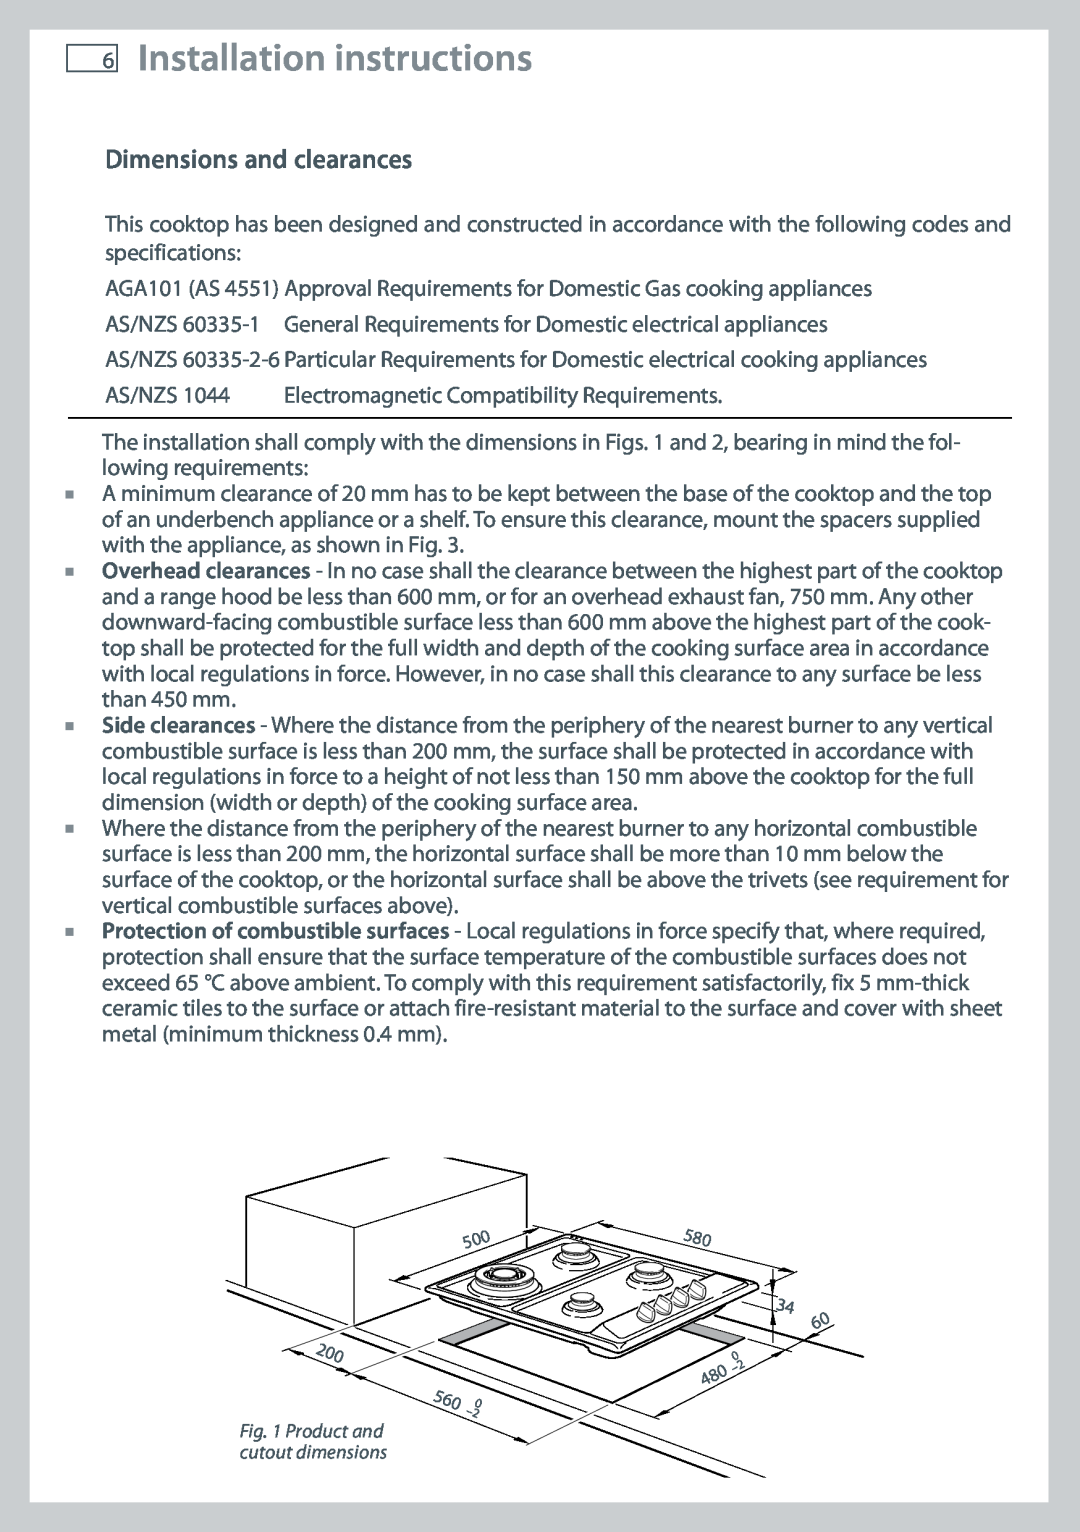 Fisher & Paykel CG604 installation instructions Installation instructions, Dimensions and clearances 